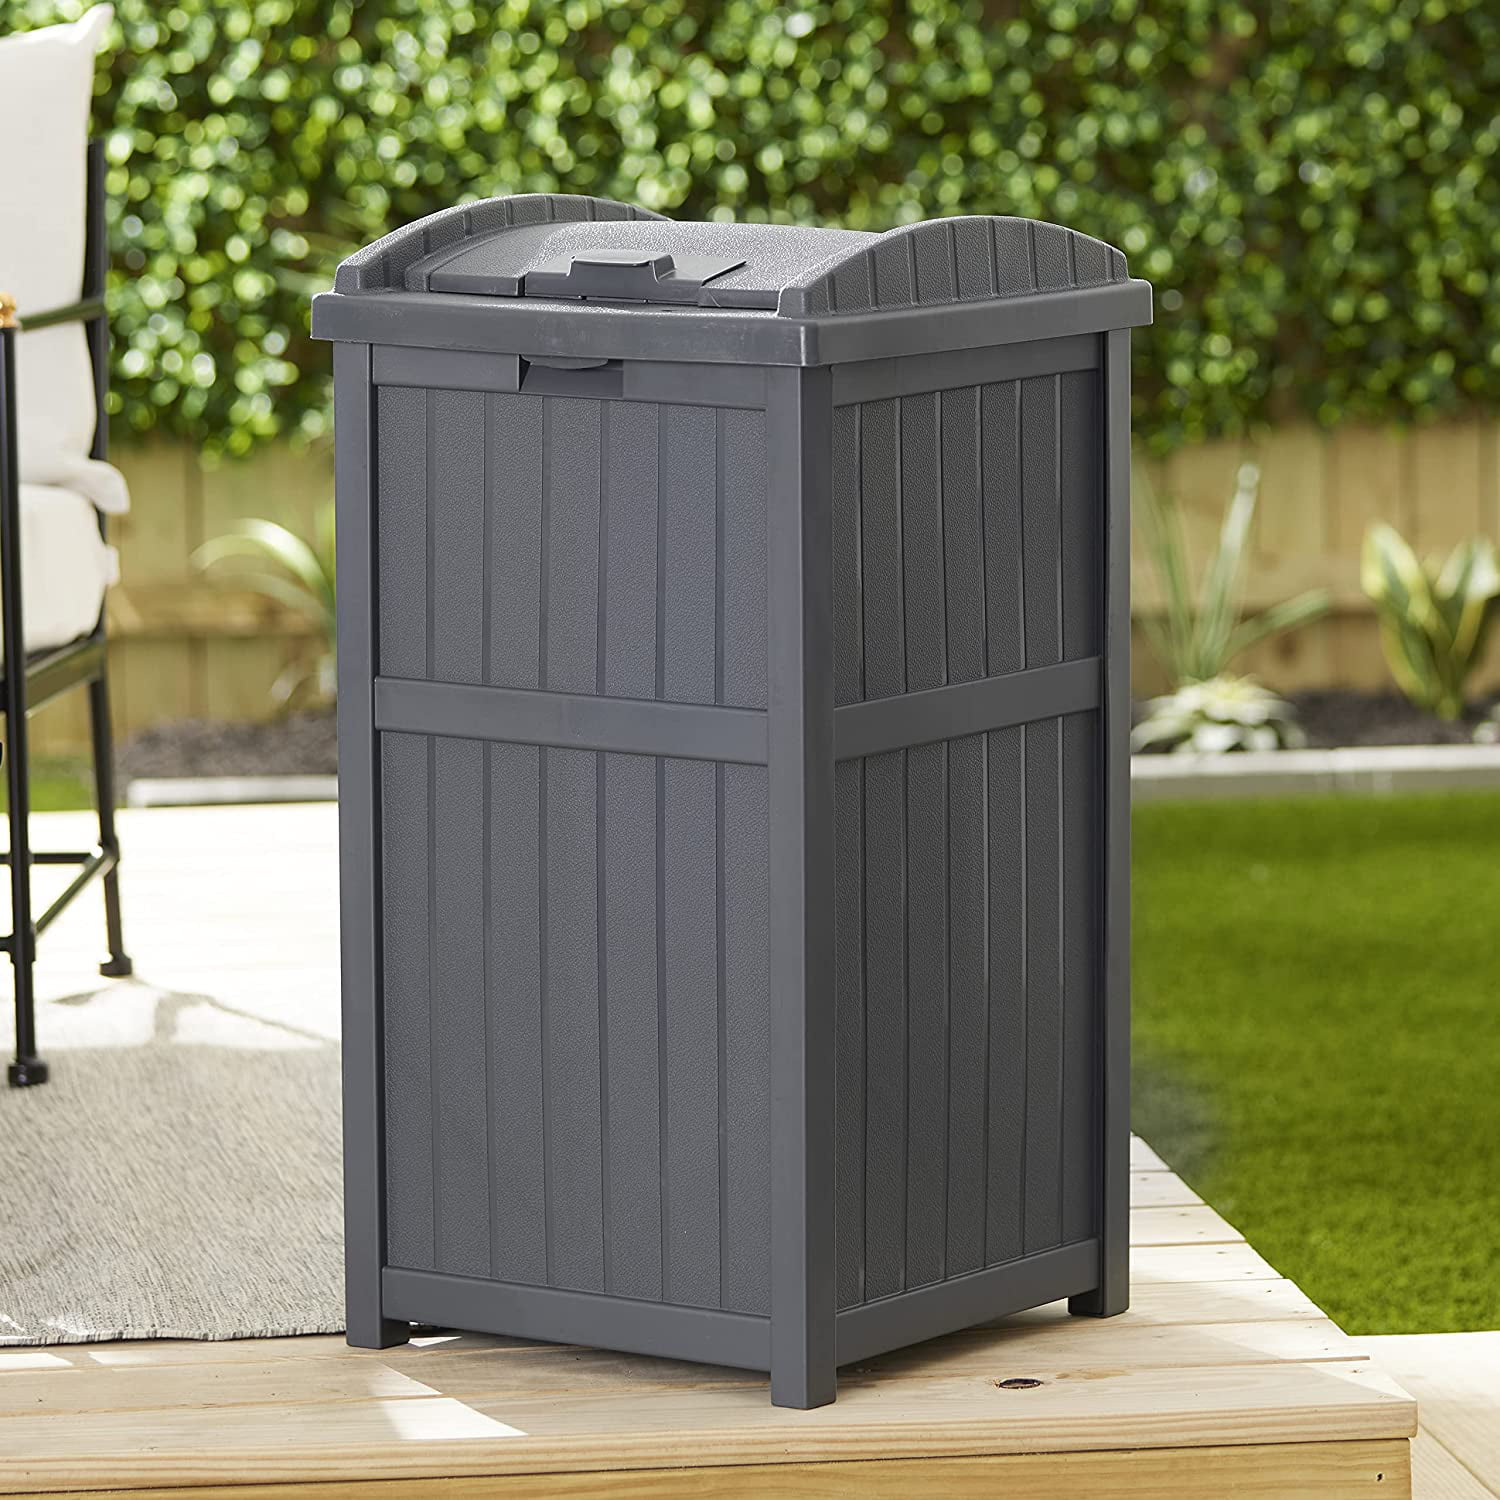 Hearth & Harbor 35 Gallon Outdoor Trash Can with Lid, Hideaway